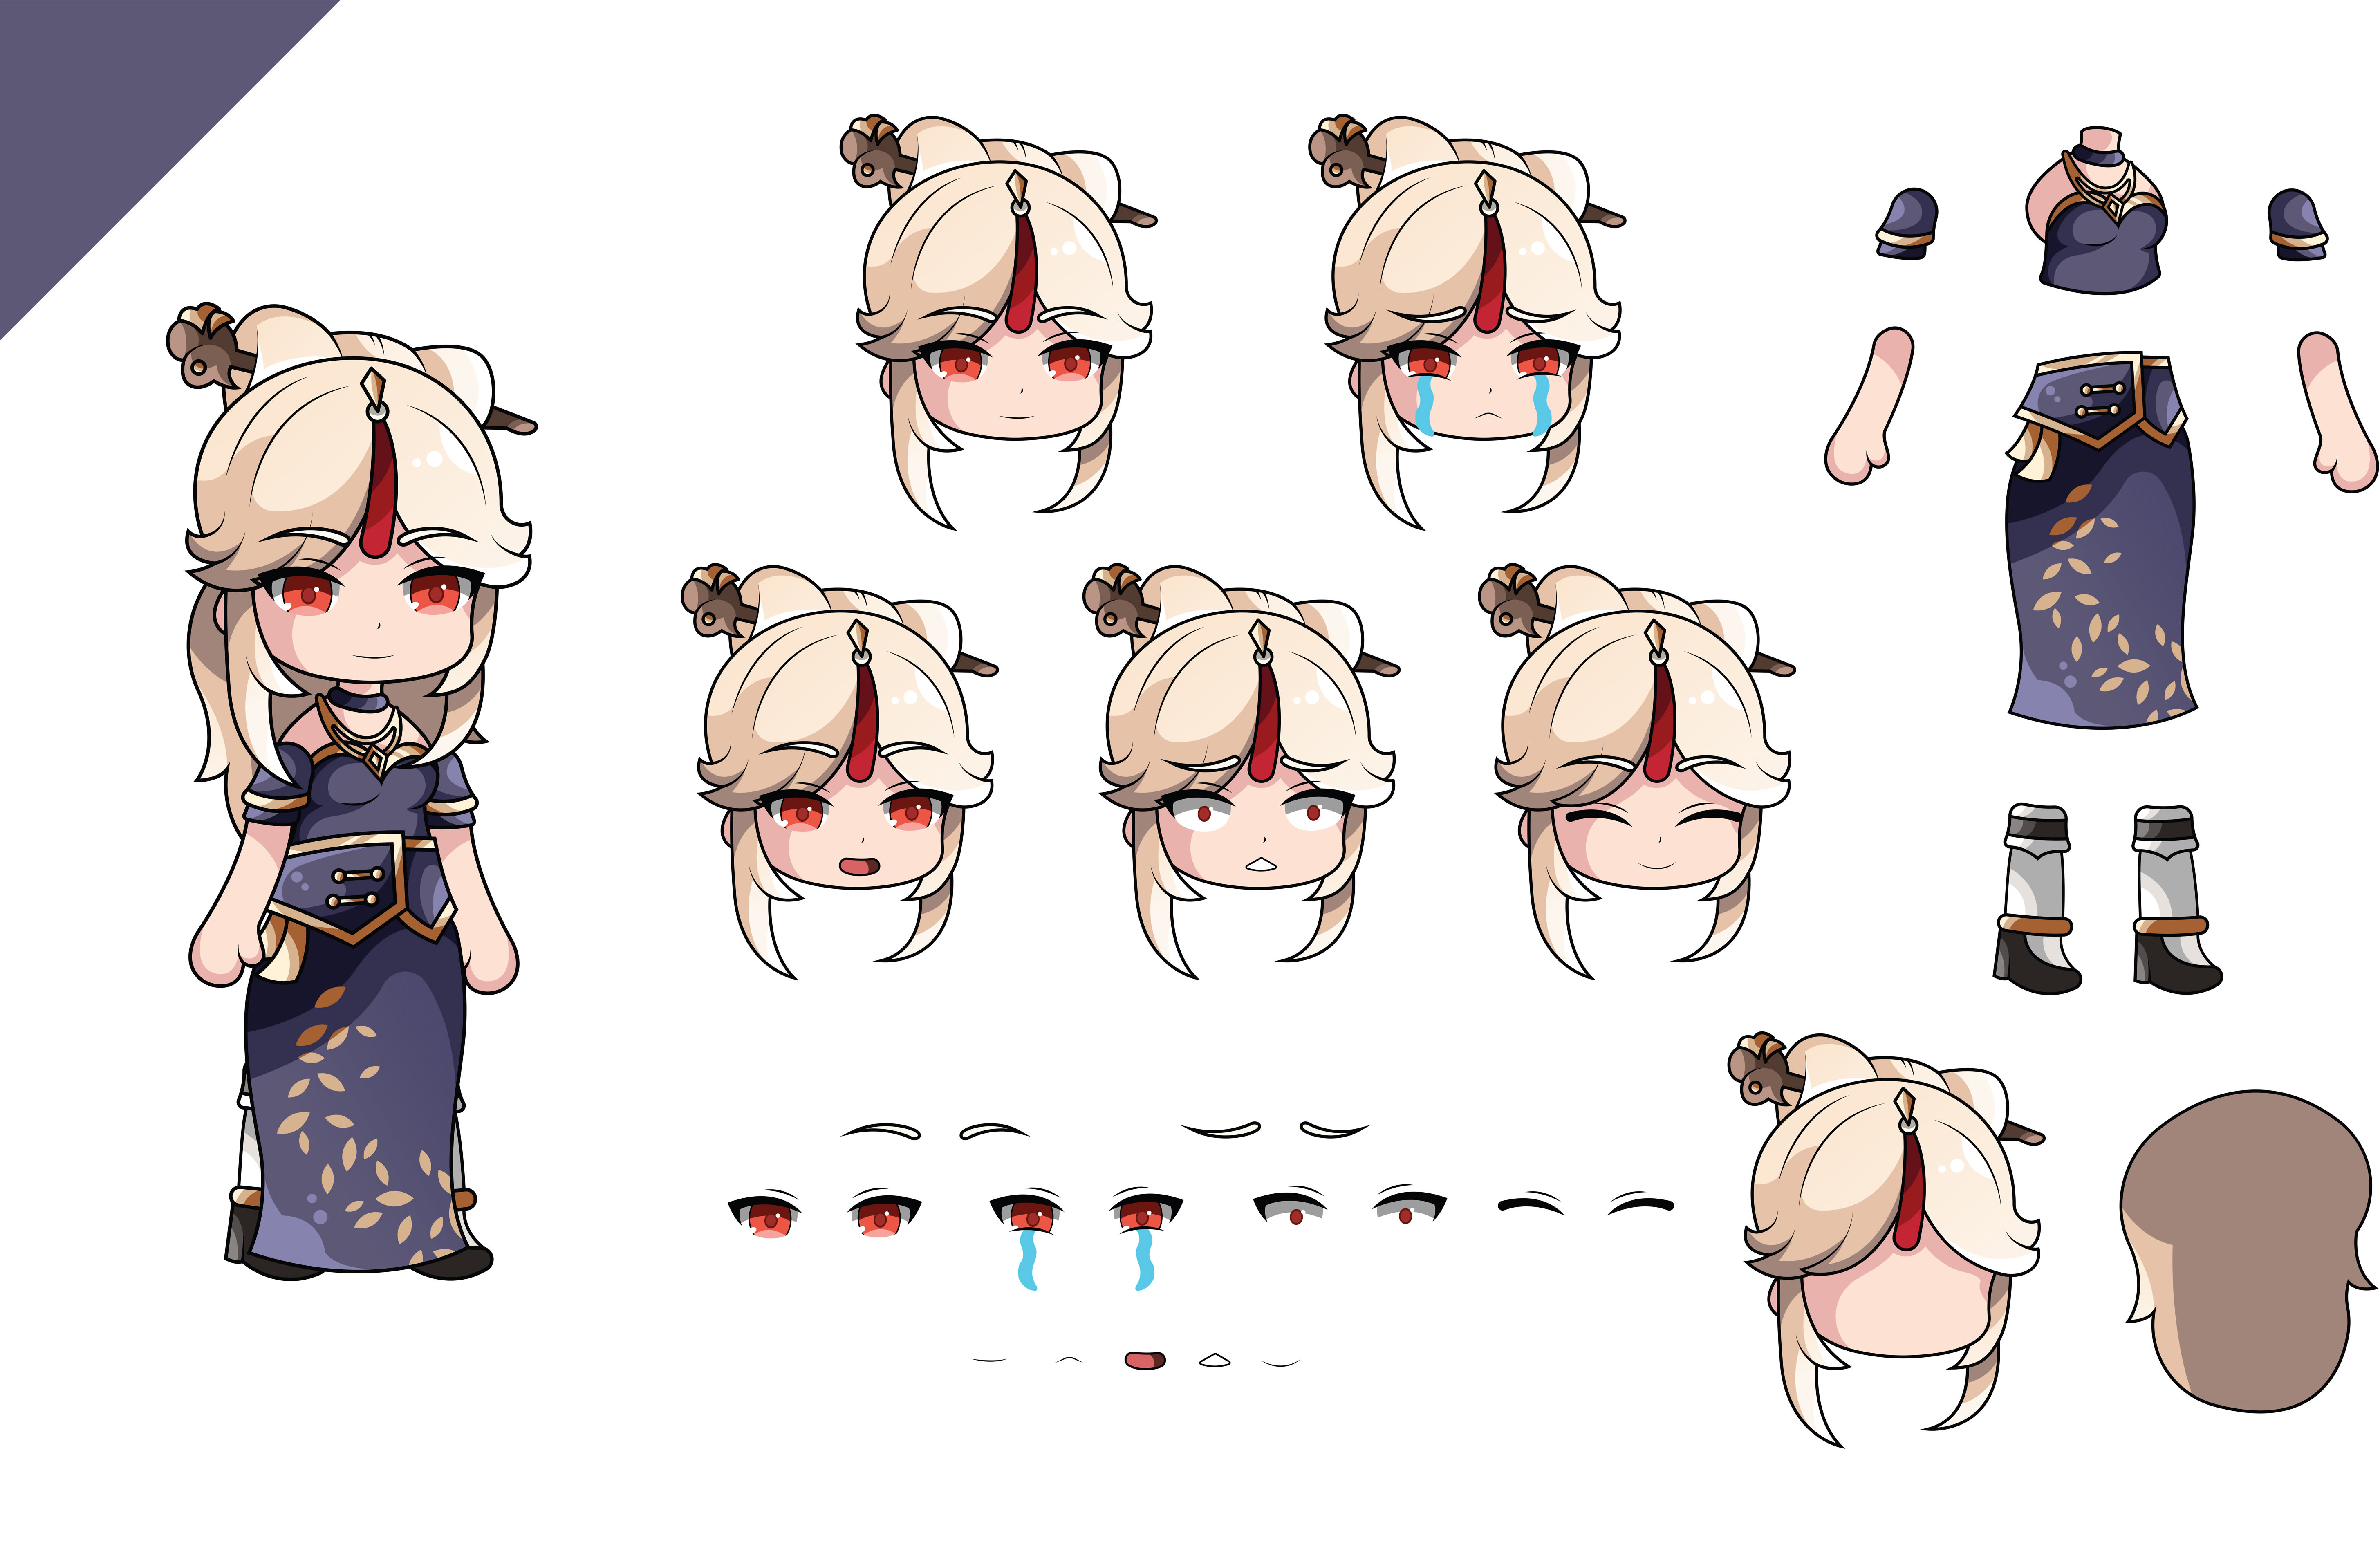 Draw gacha oc with layers for animation by Zakhariikoval